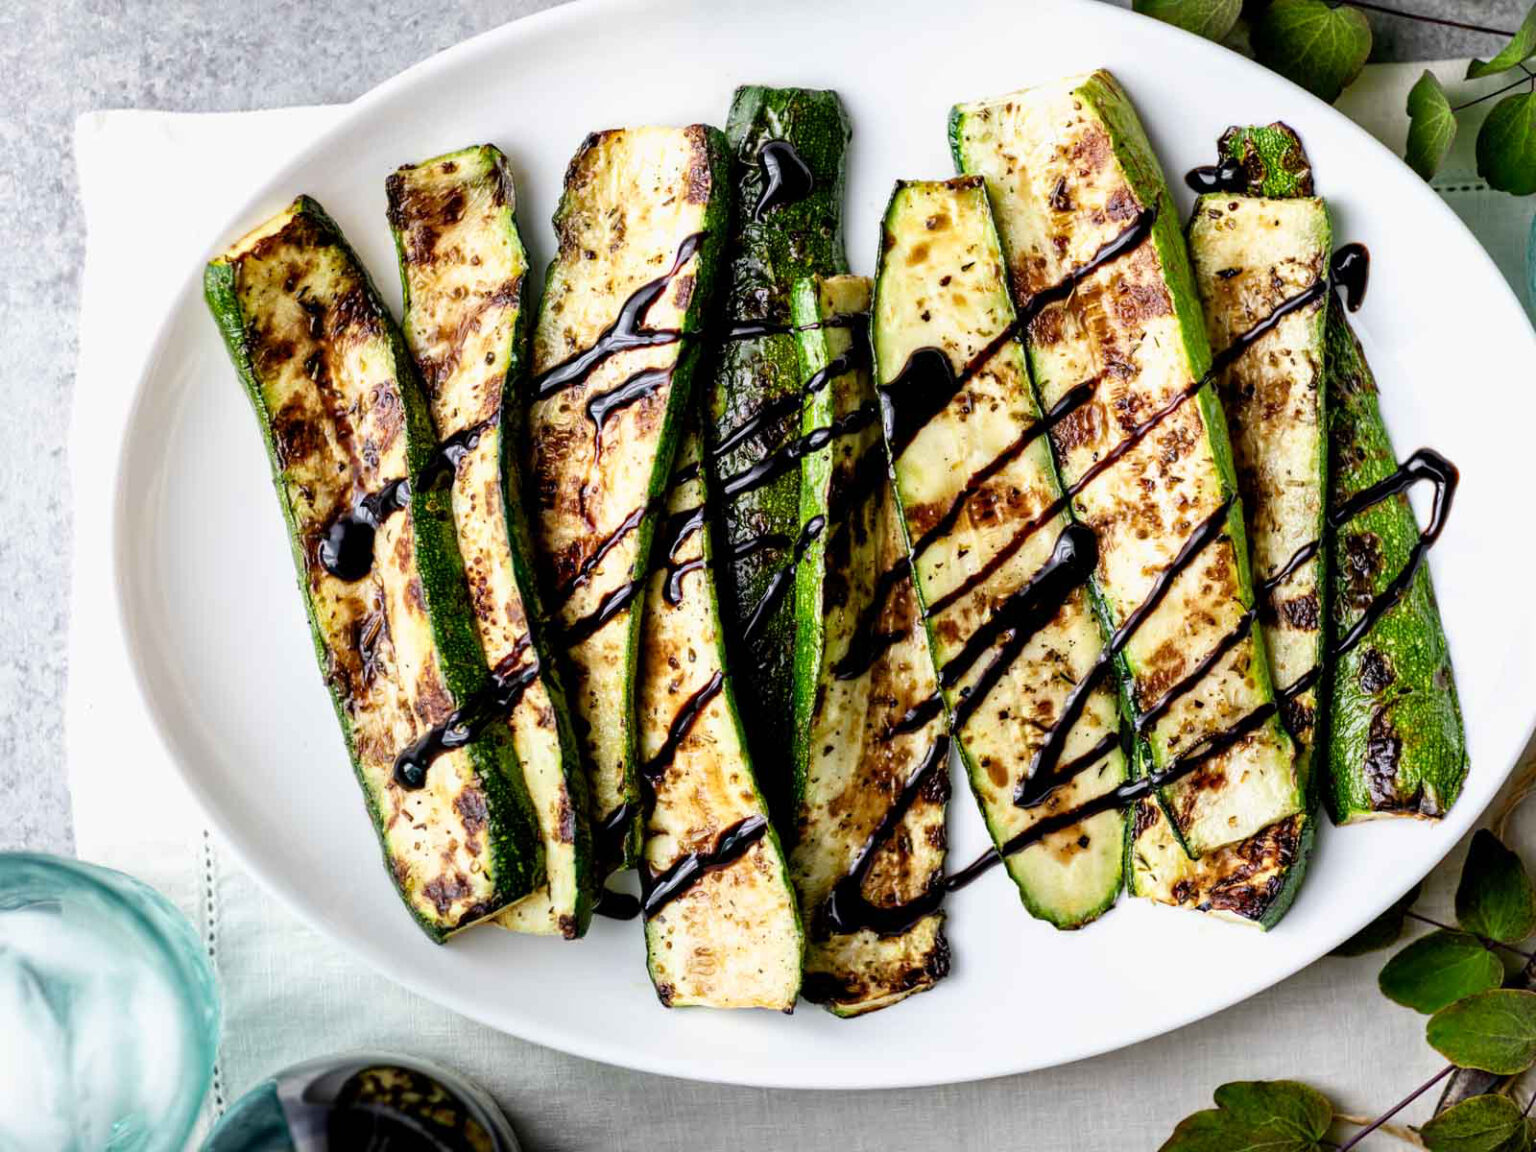 48 Memorial Day Recipes That Are Healthy *and* Delicious